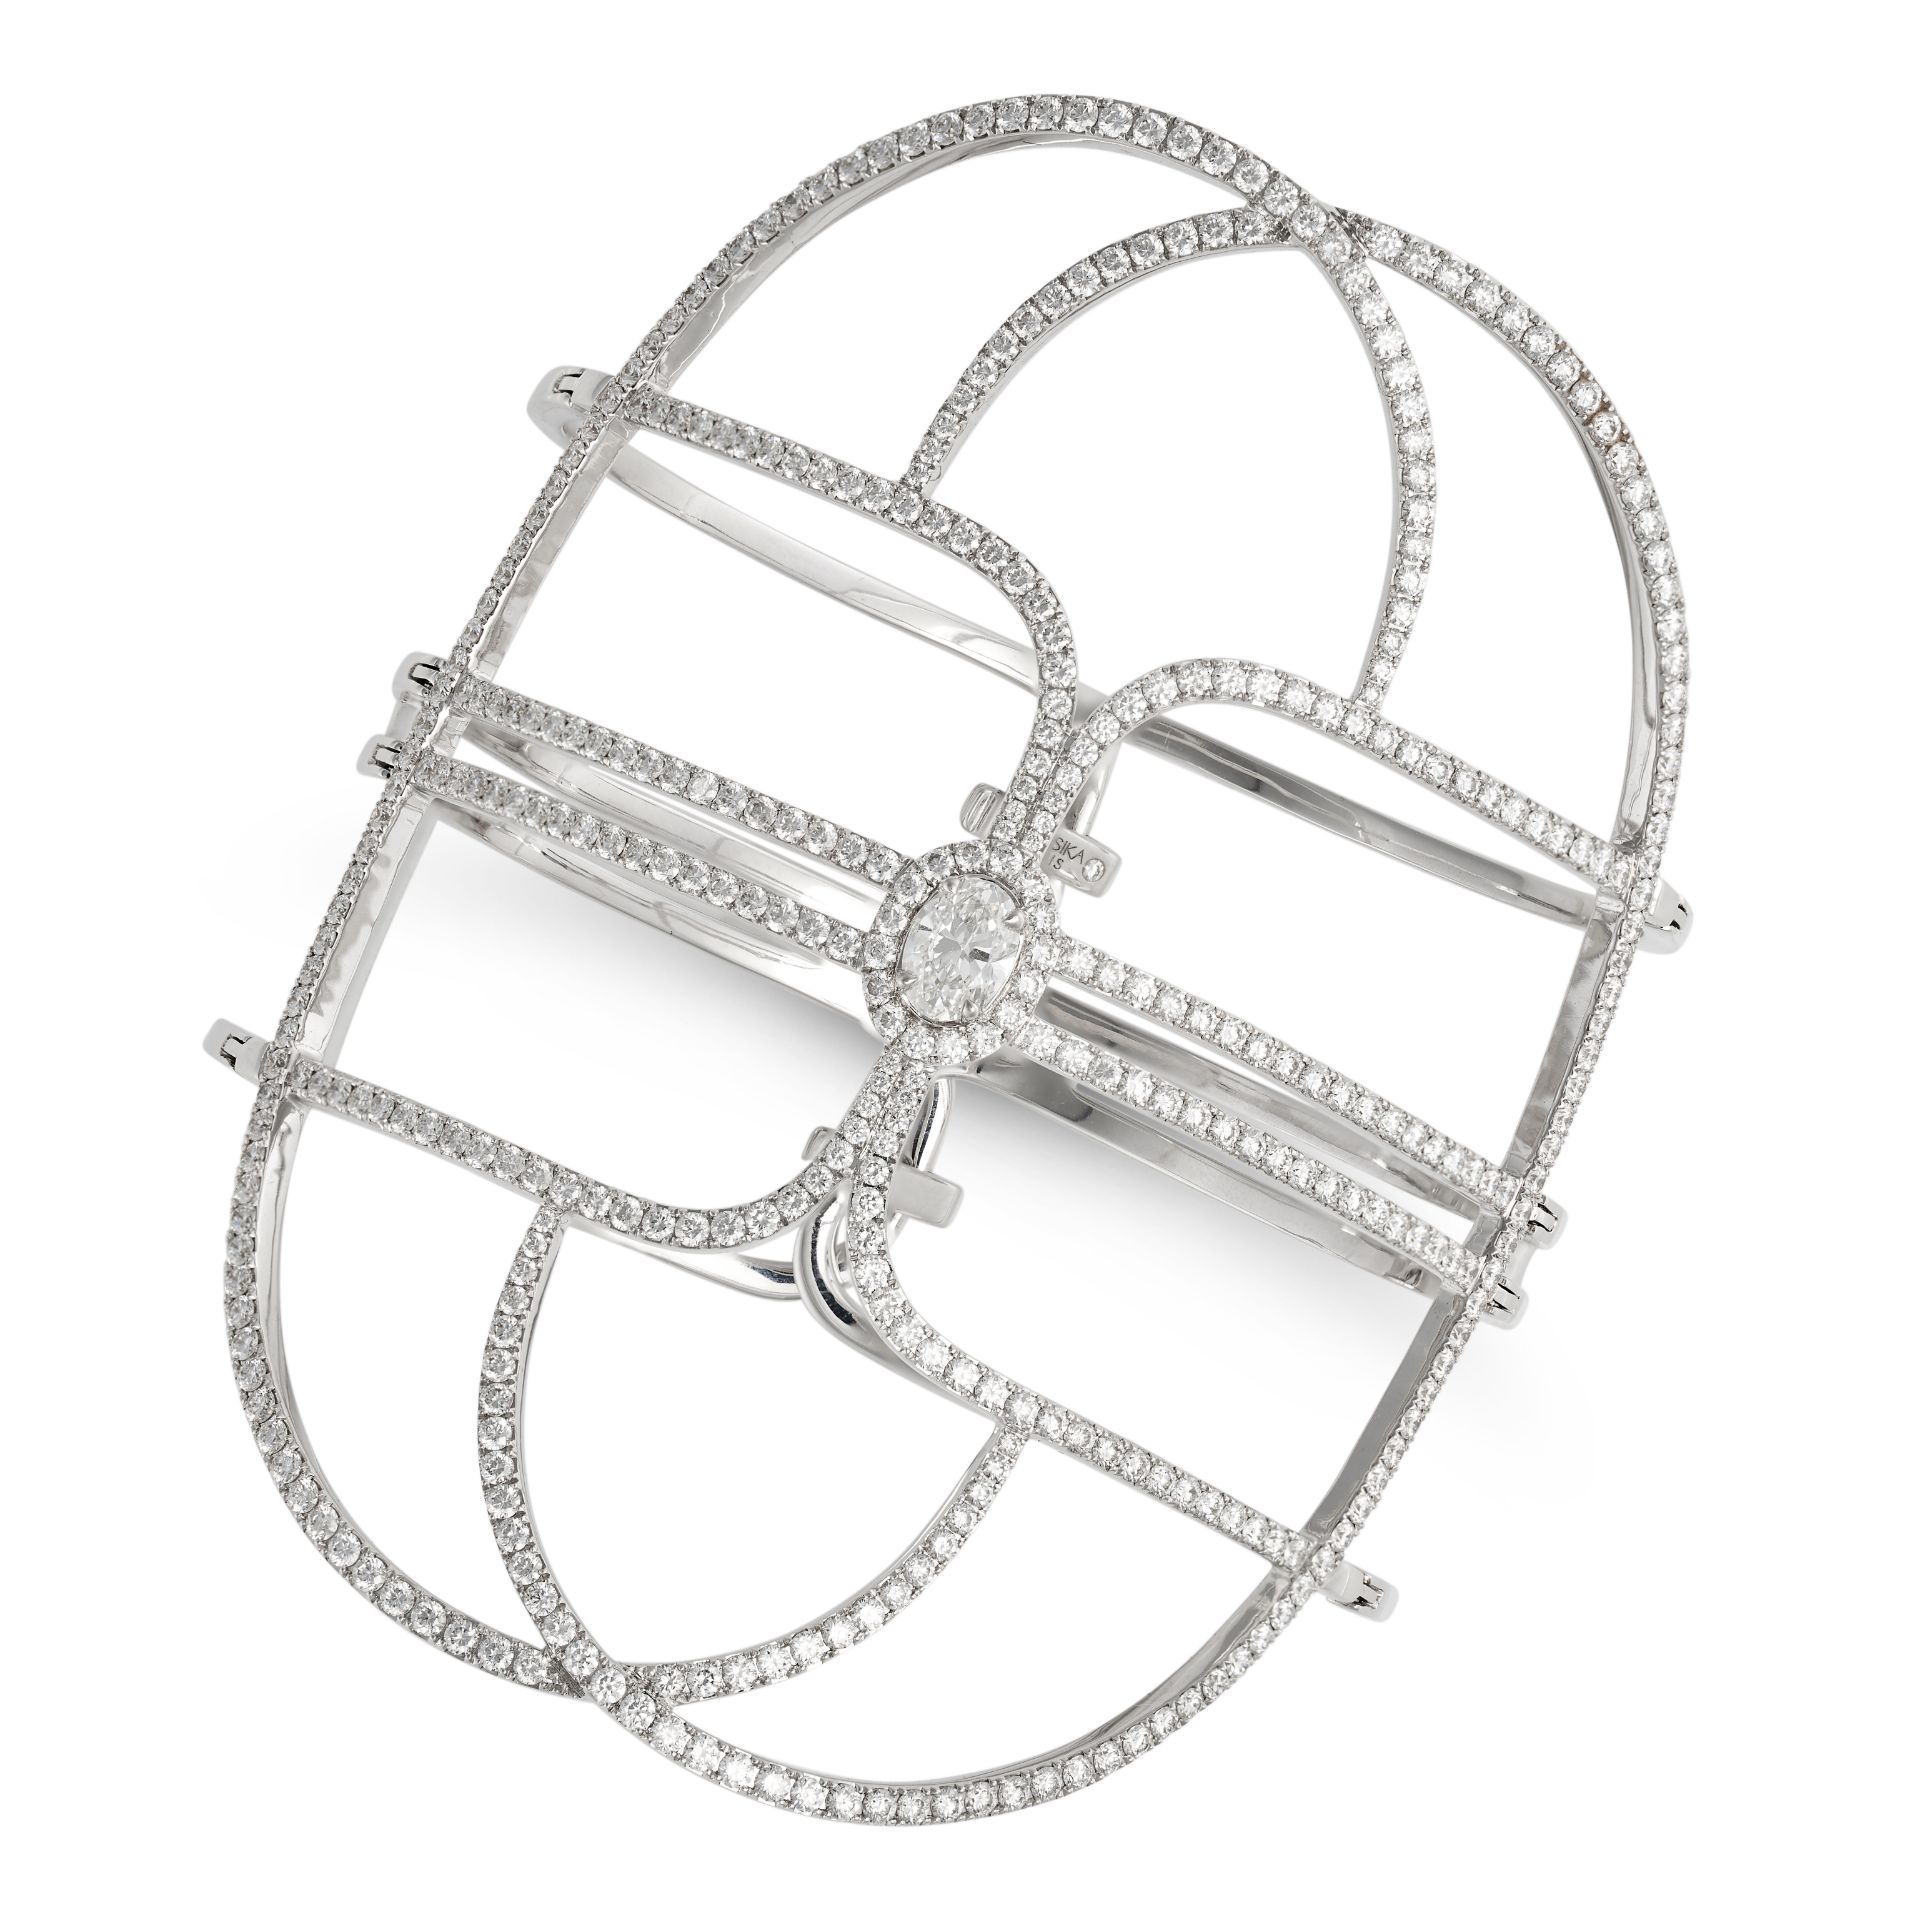 MESSIKA, A GLAM'AZONE DIAMOND CUFF BRACELET in 18ct white gold, set with an oval cut diamond of a...